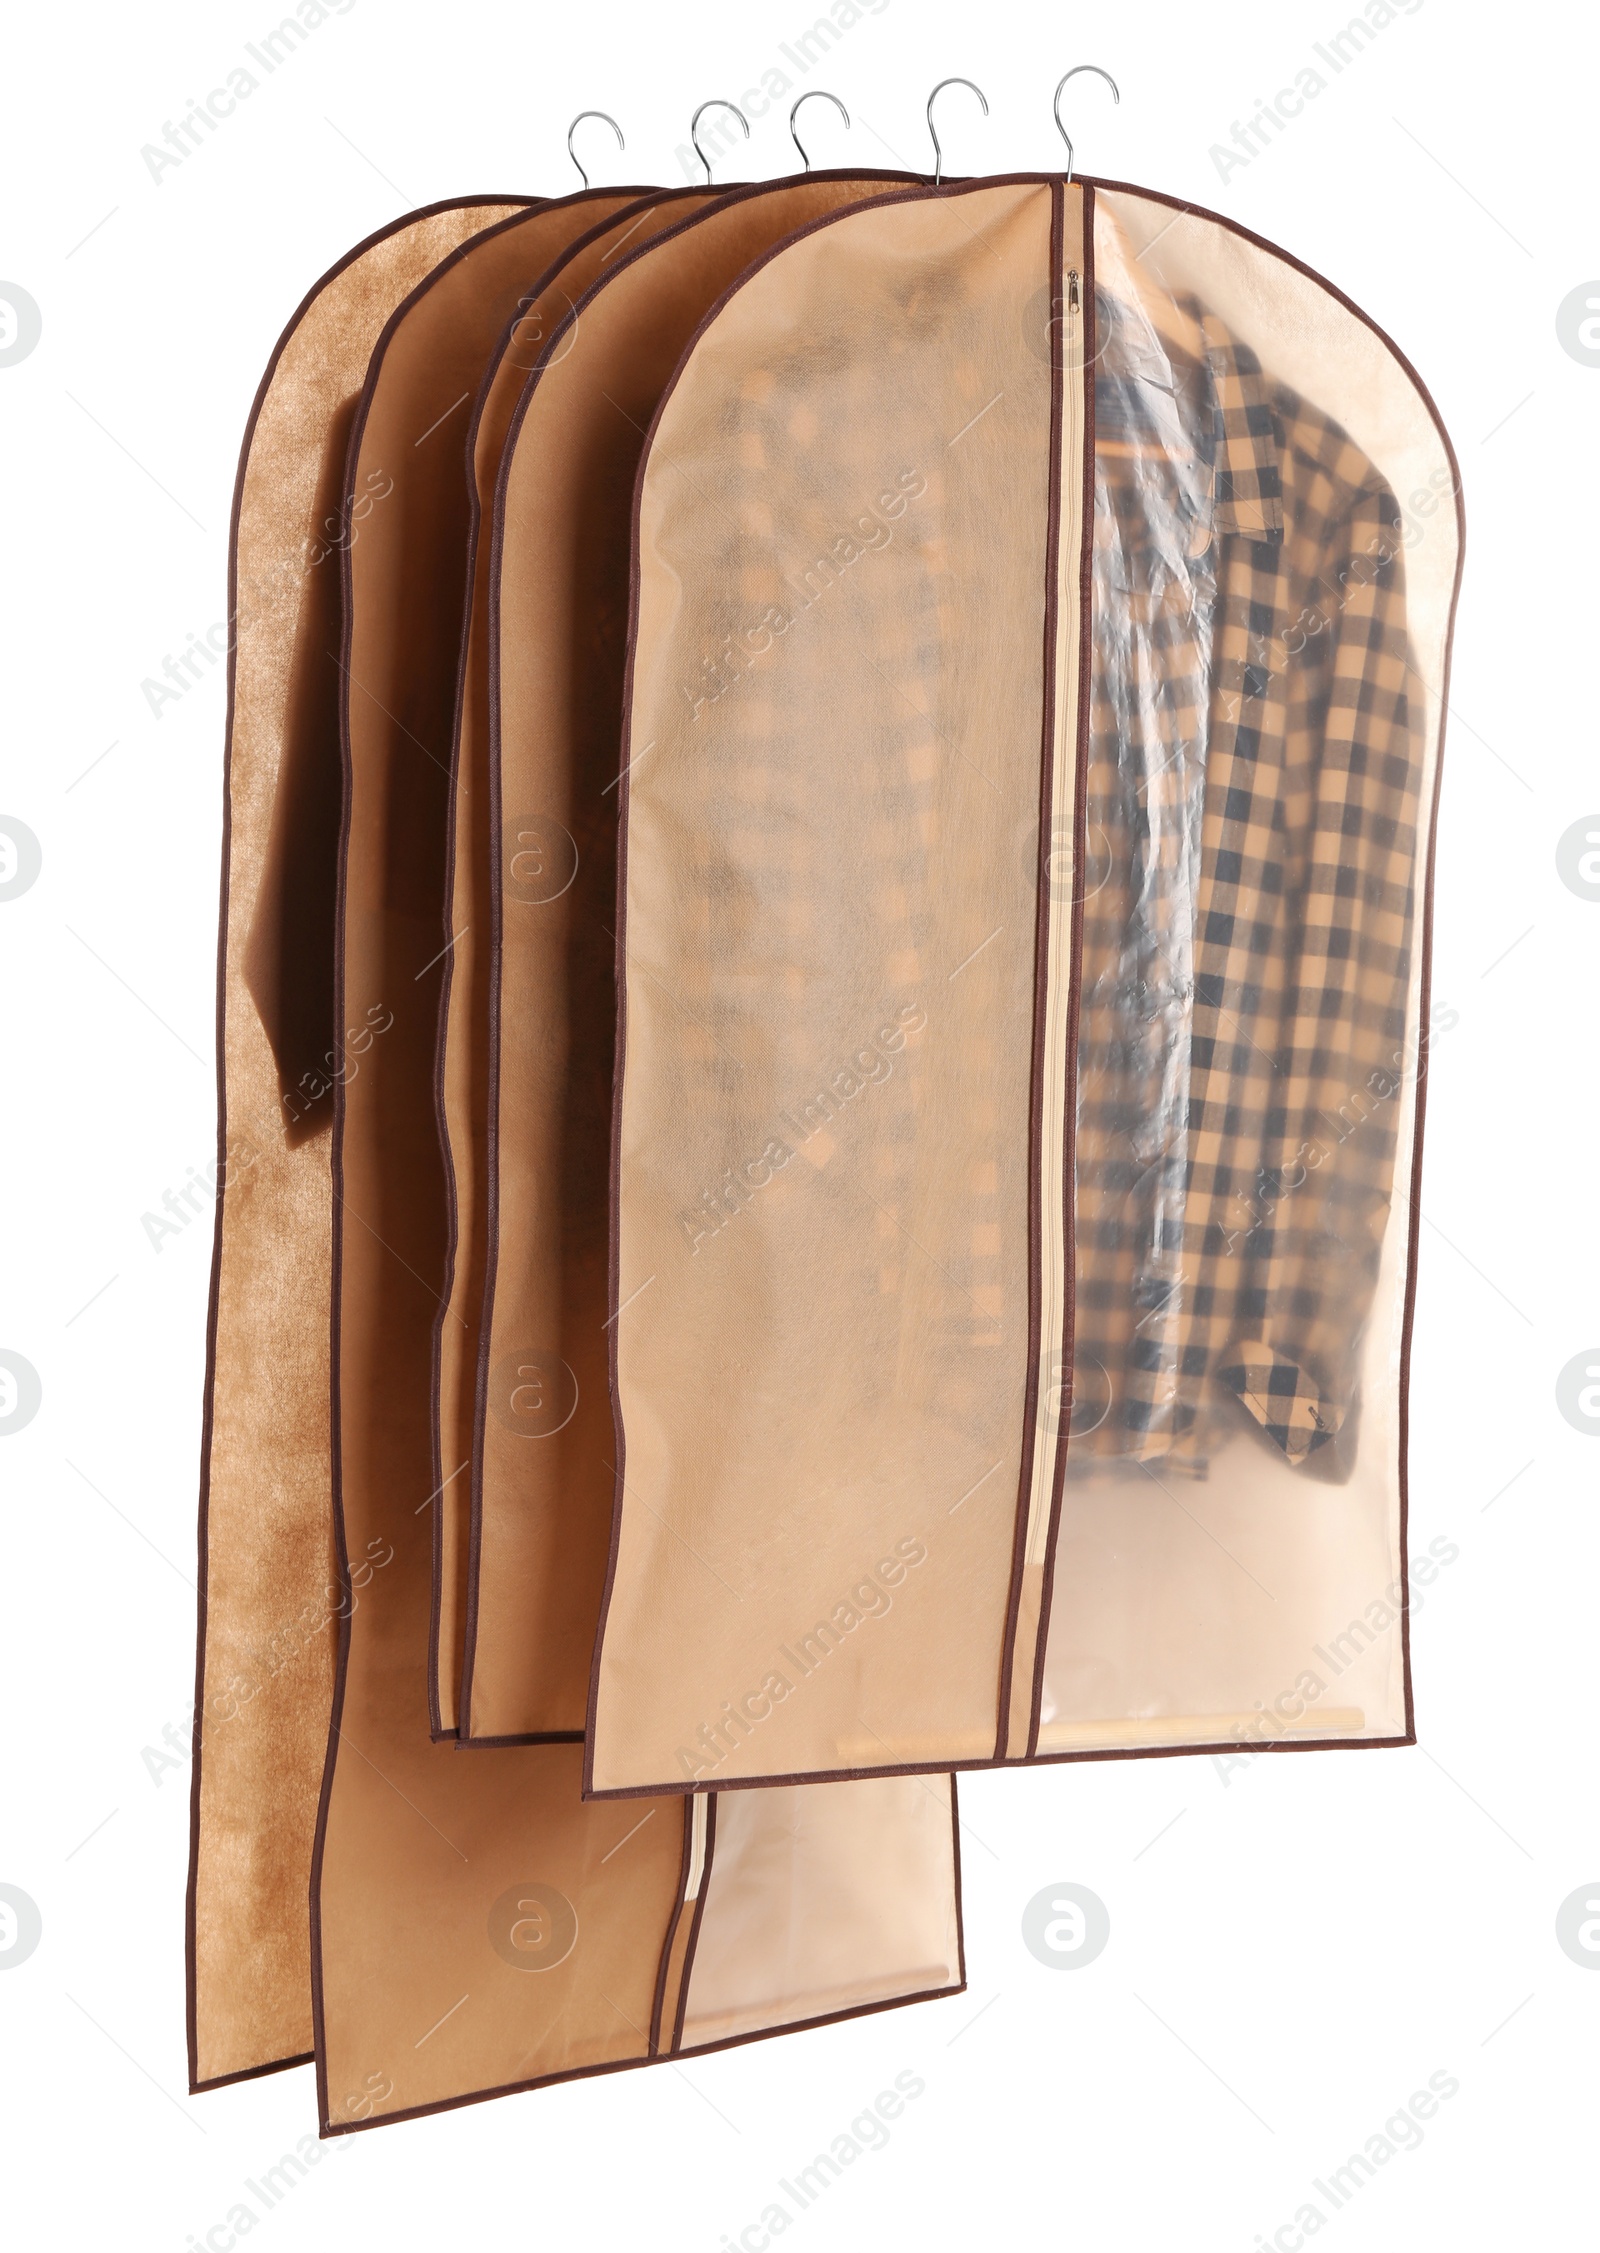 Photo of Garment bags with clothes on white background